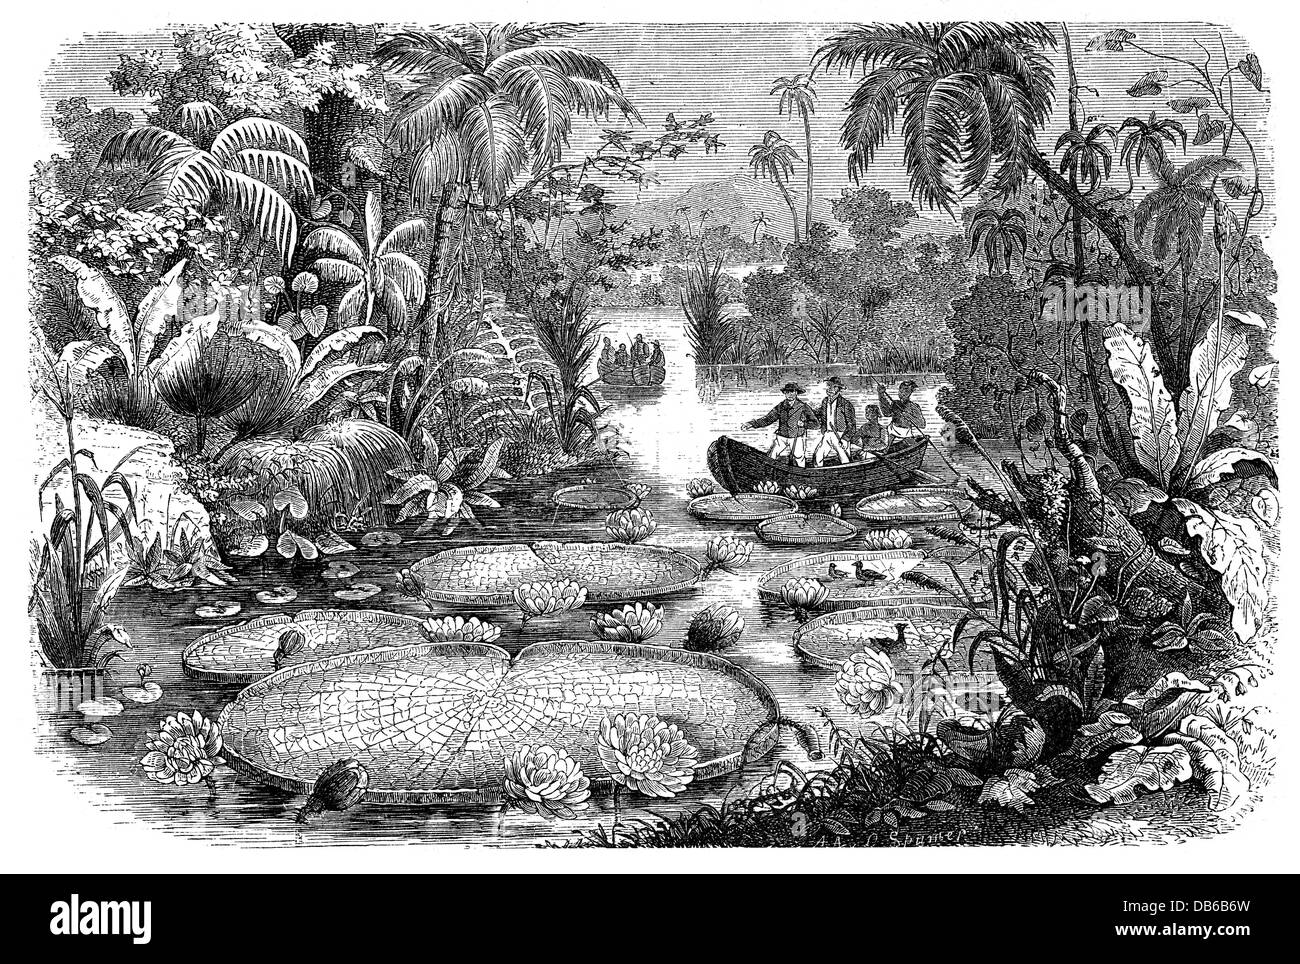 botany, flowers, Victoria amazonica (Nymphaea Victoria), on the Amazon river, wood engraving, 19th century, Victoria regia, plant, plants, aquatic plants, flower, water lily, water lilies, Nymphaeaceae, South America, landscape, historic, historical, Additional-Rights-Clearences-Not Available Stock Photo